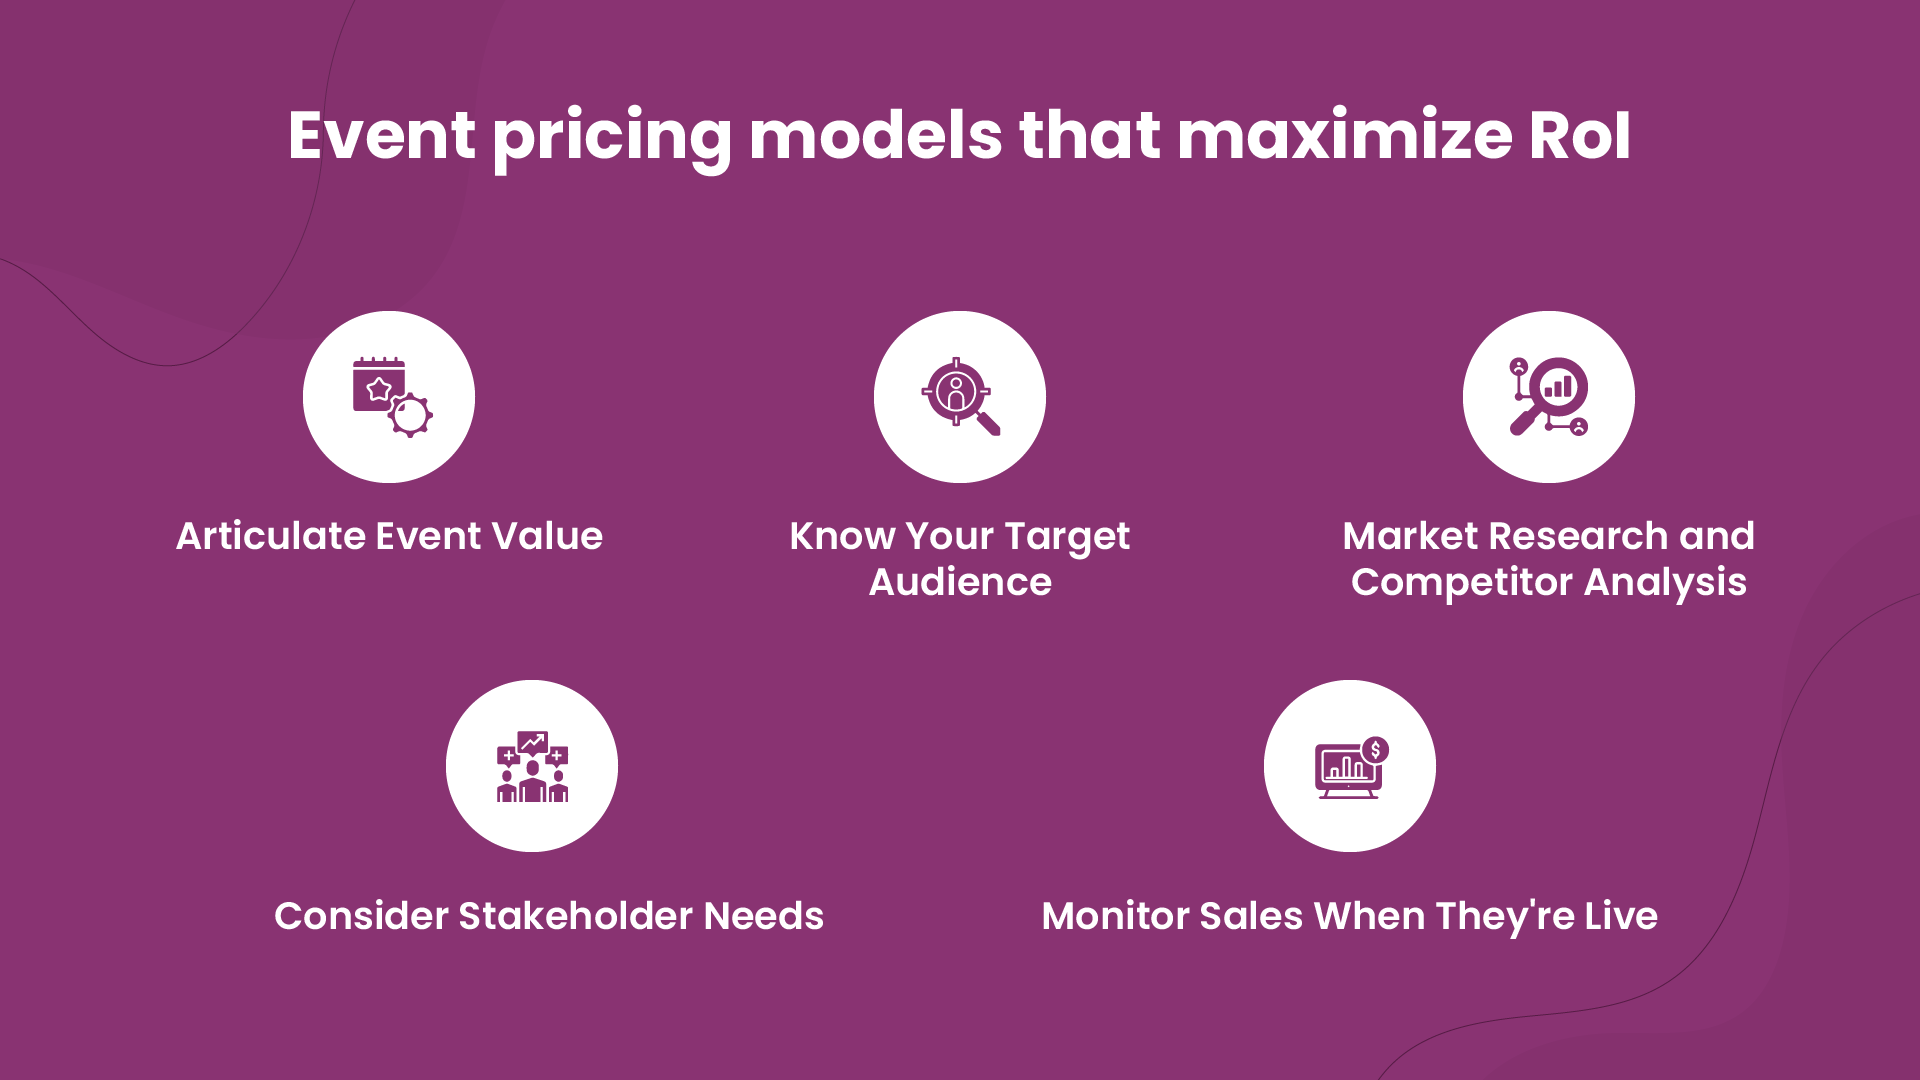 Creating event pricing models that maximize RoI